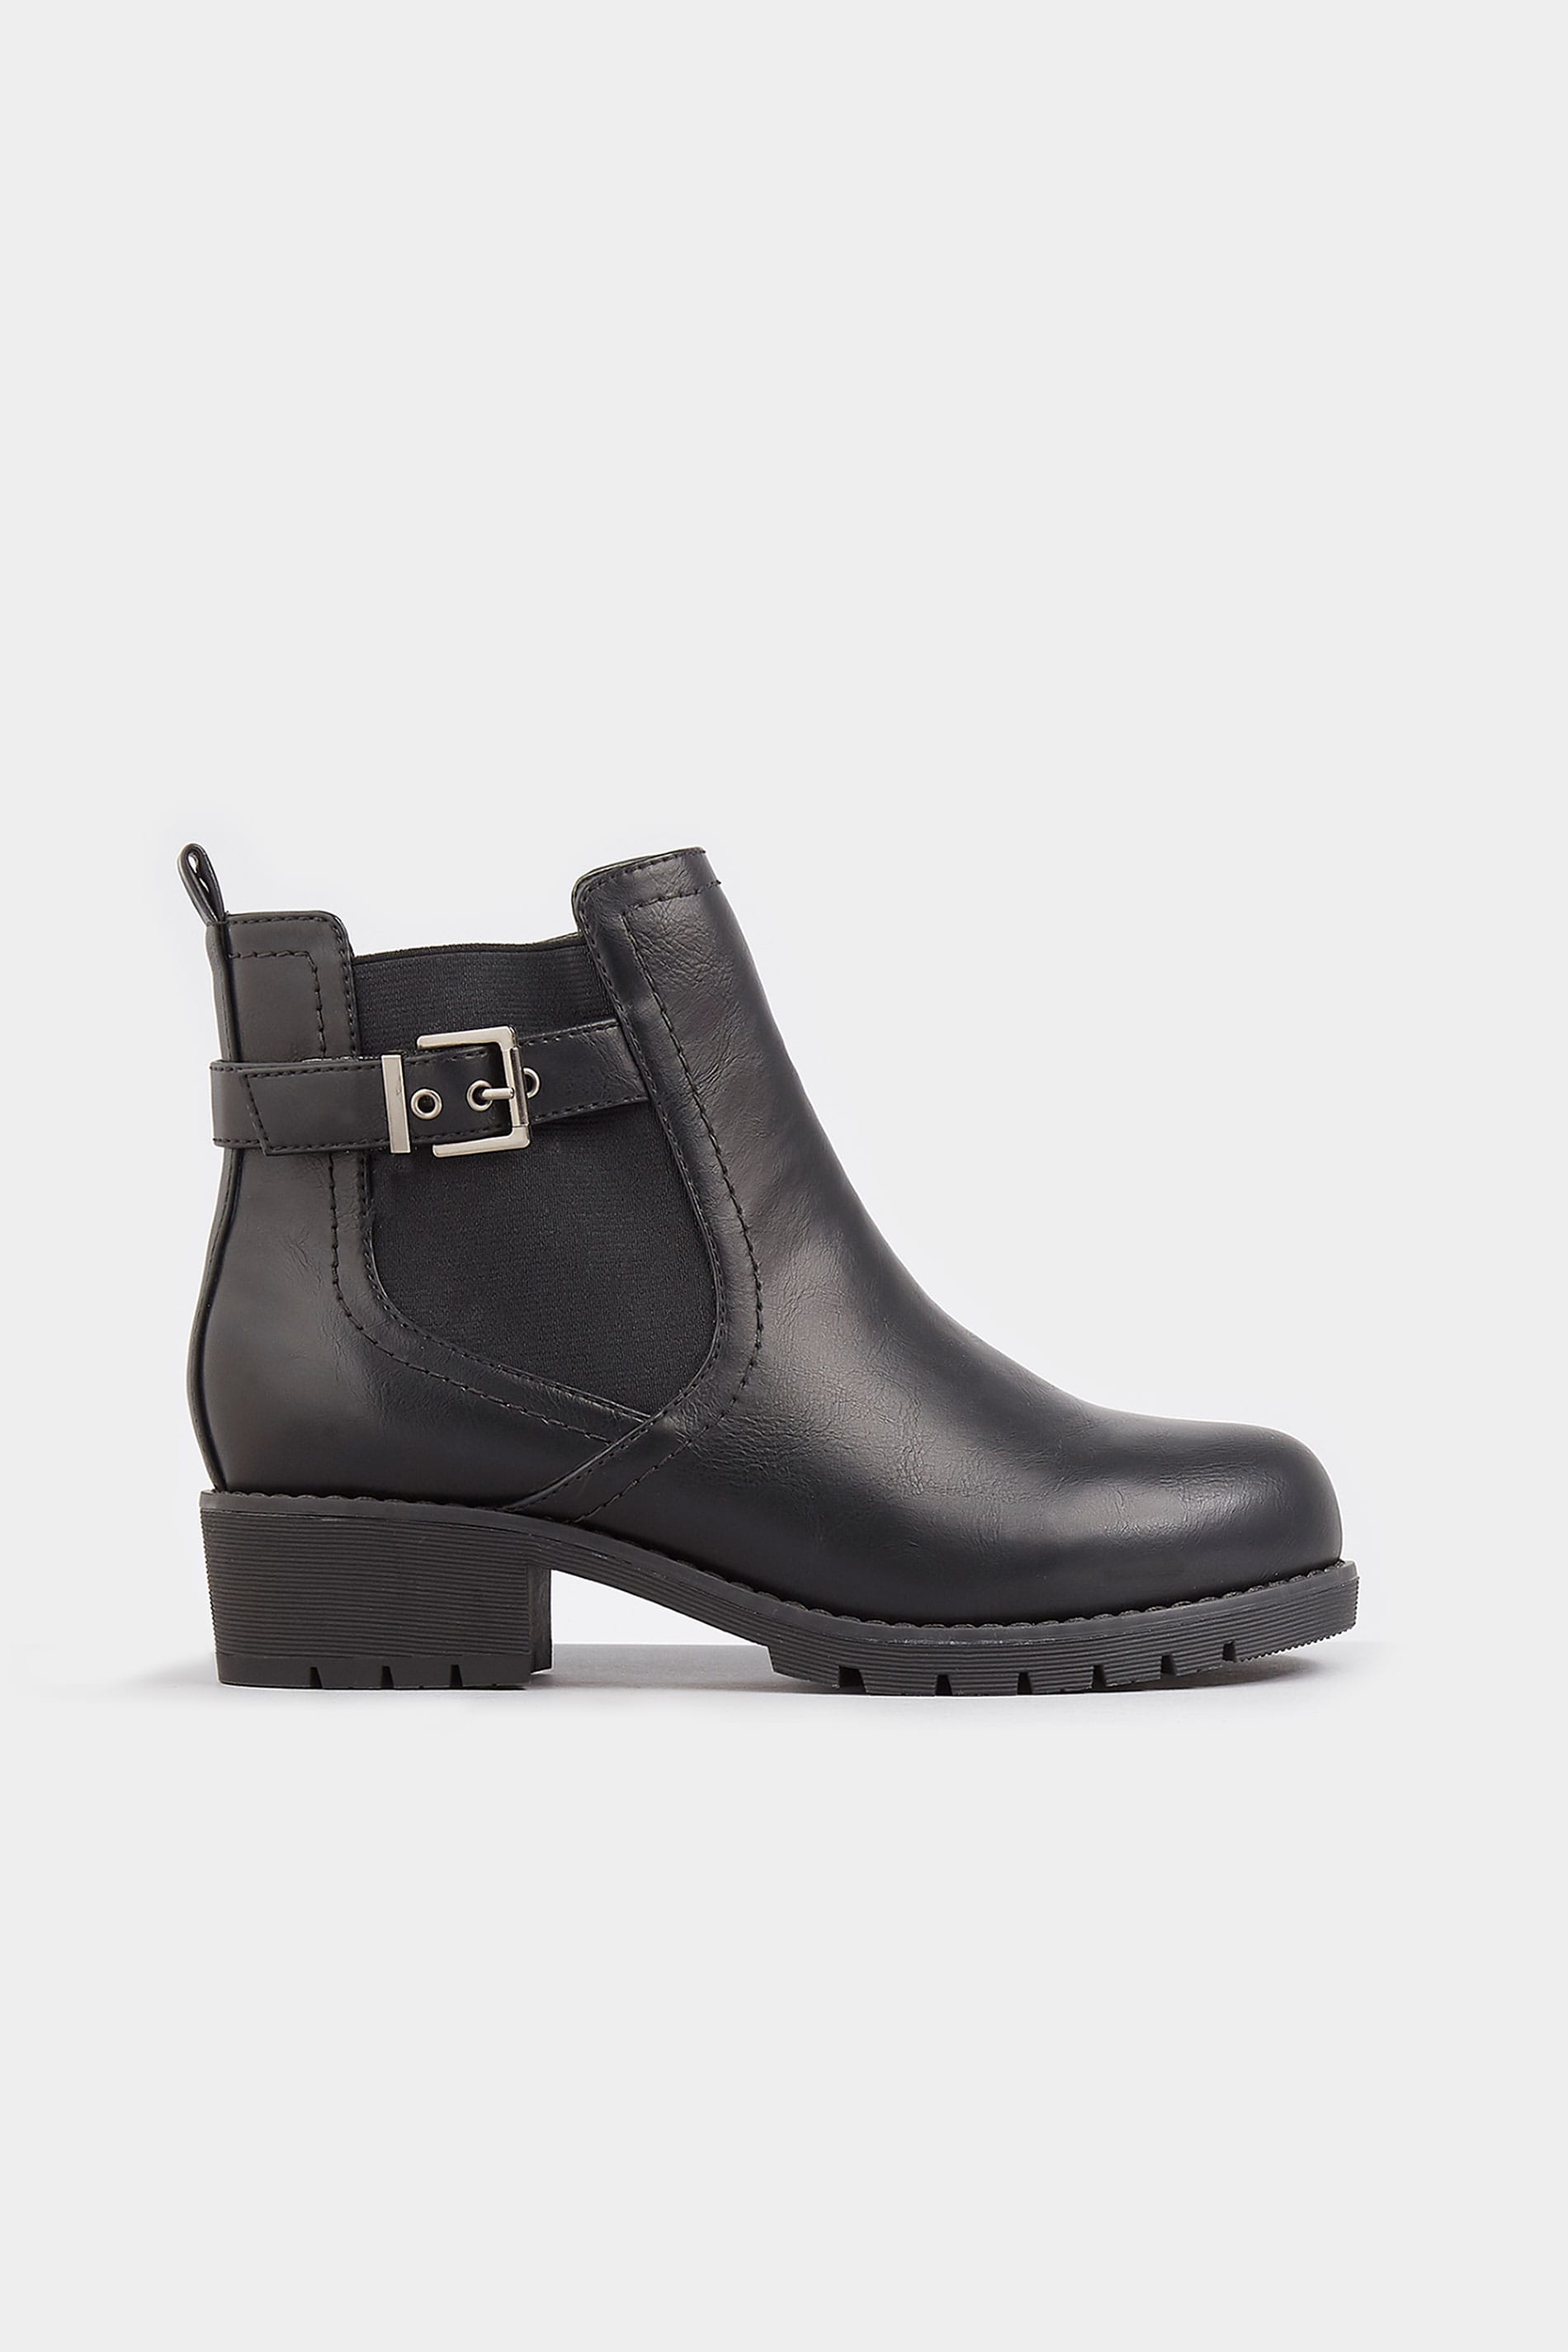 Black Chelsea Buckle Ankle Boots In Extra Wide Fit | Yours Clothing 3